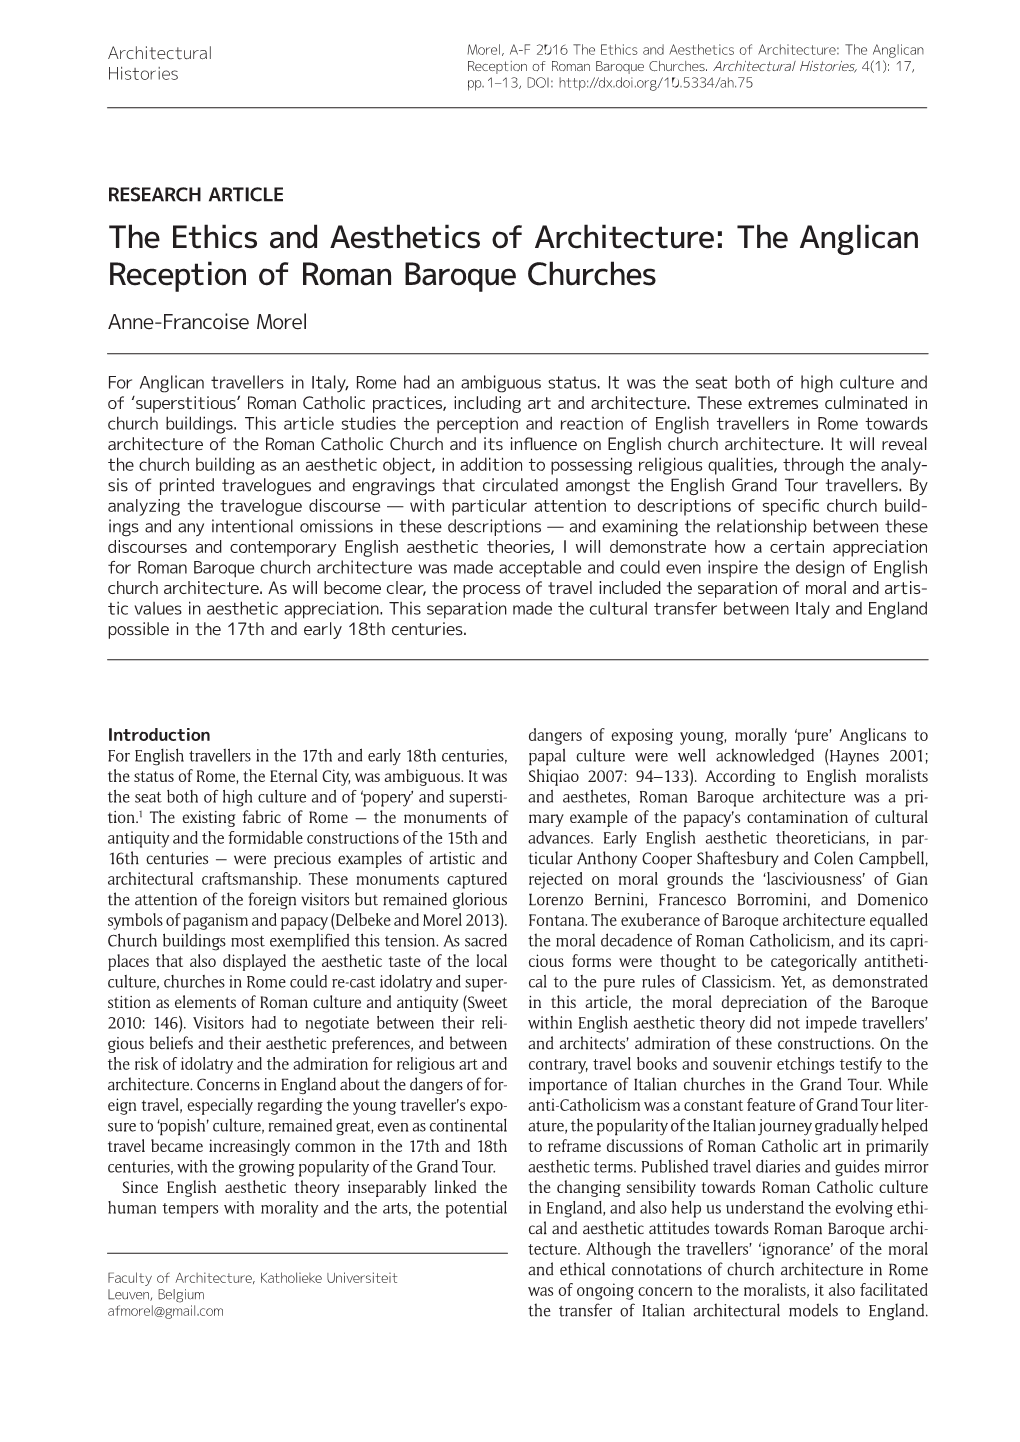 The Ethics and Aesthetics of Architecture: the Anglican Reception of Roman Baroque Churches